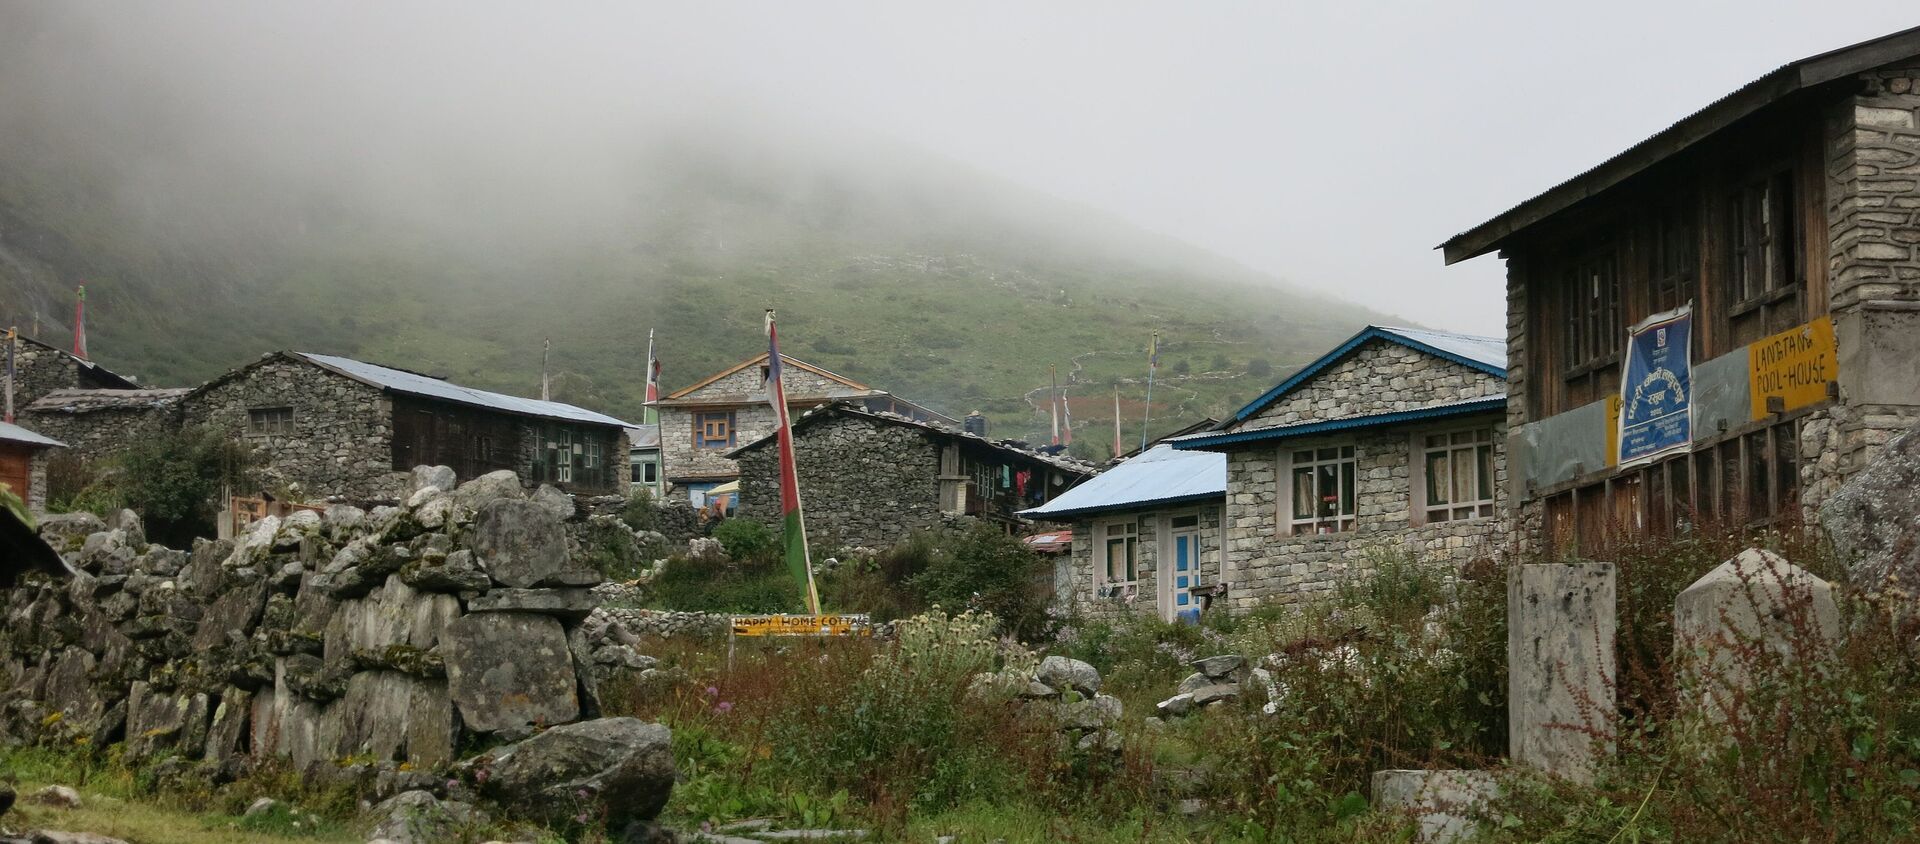 This photo taken on September 11, 2014 shows a general view of the village of Langtang, in the remote Nepalese district of Rasuwa bordering China's Tibet - Sputnik International, 1920, 14.04.2021